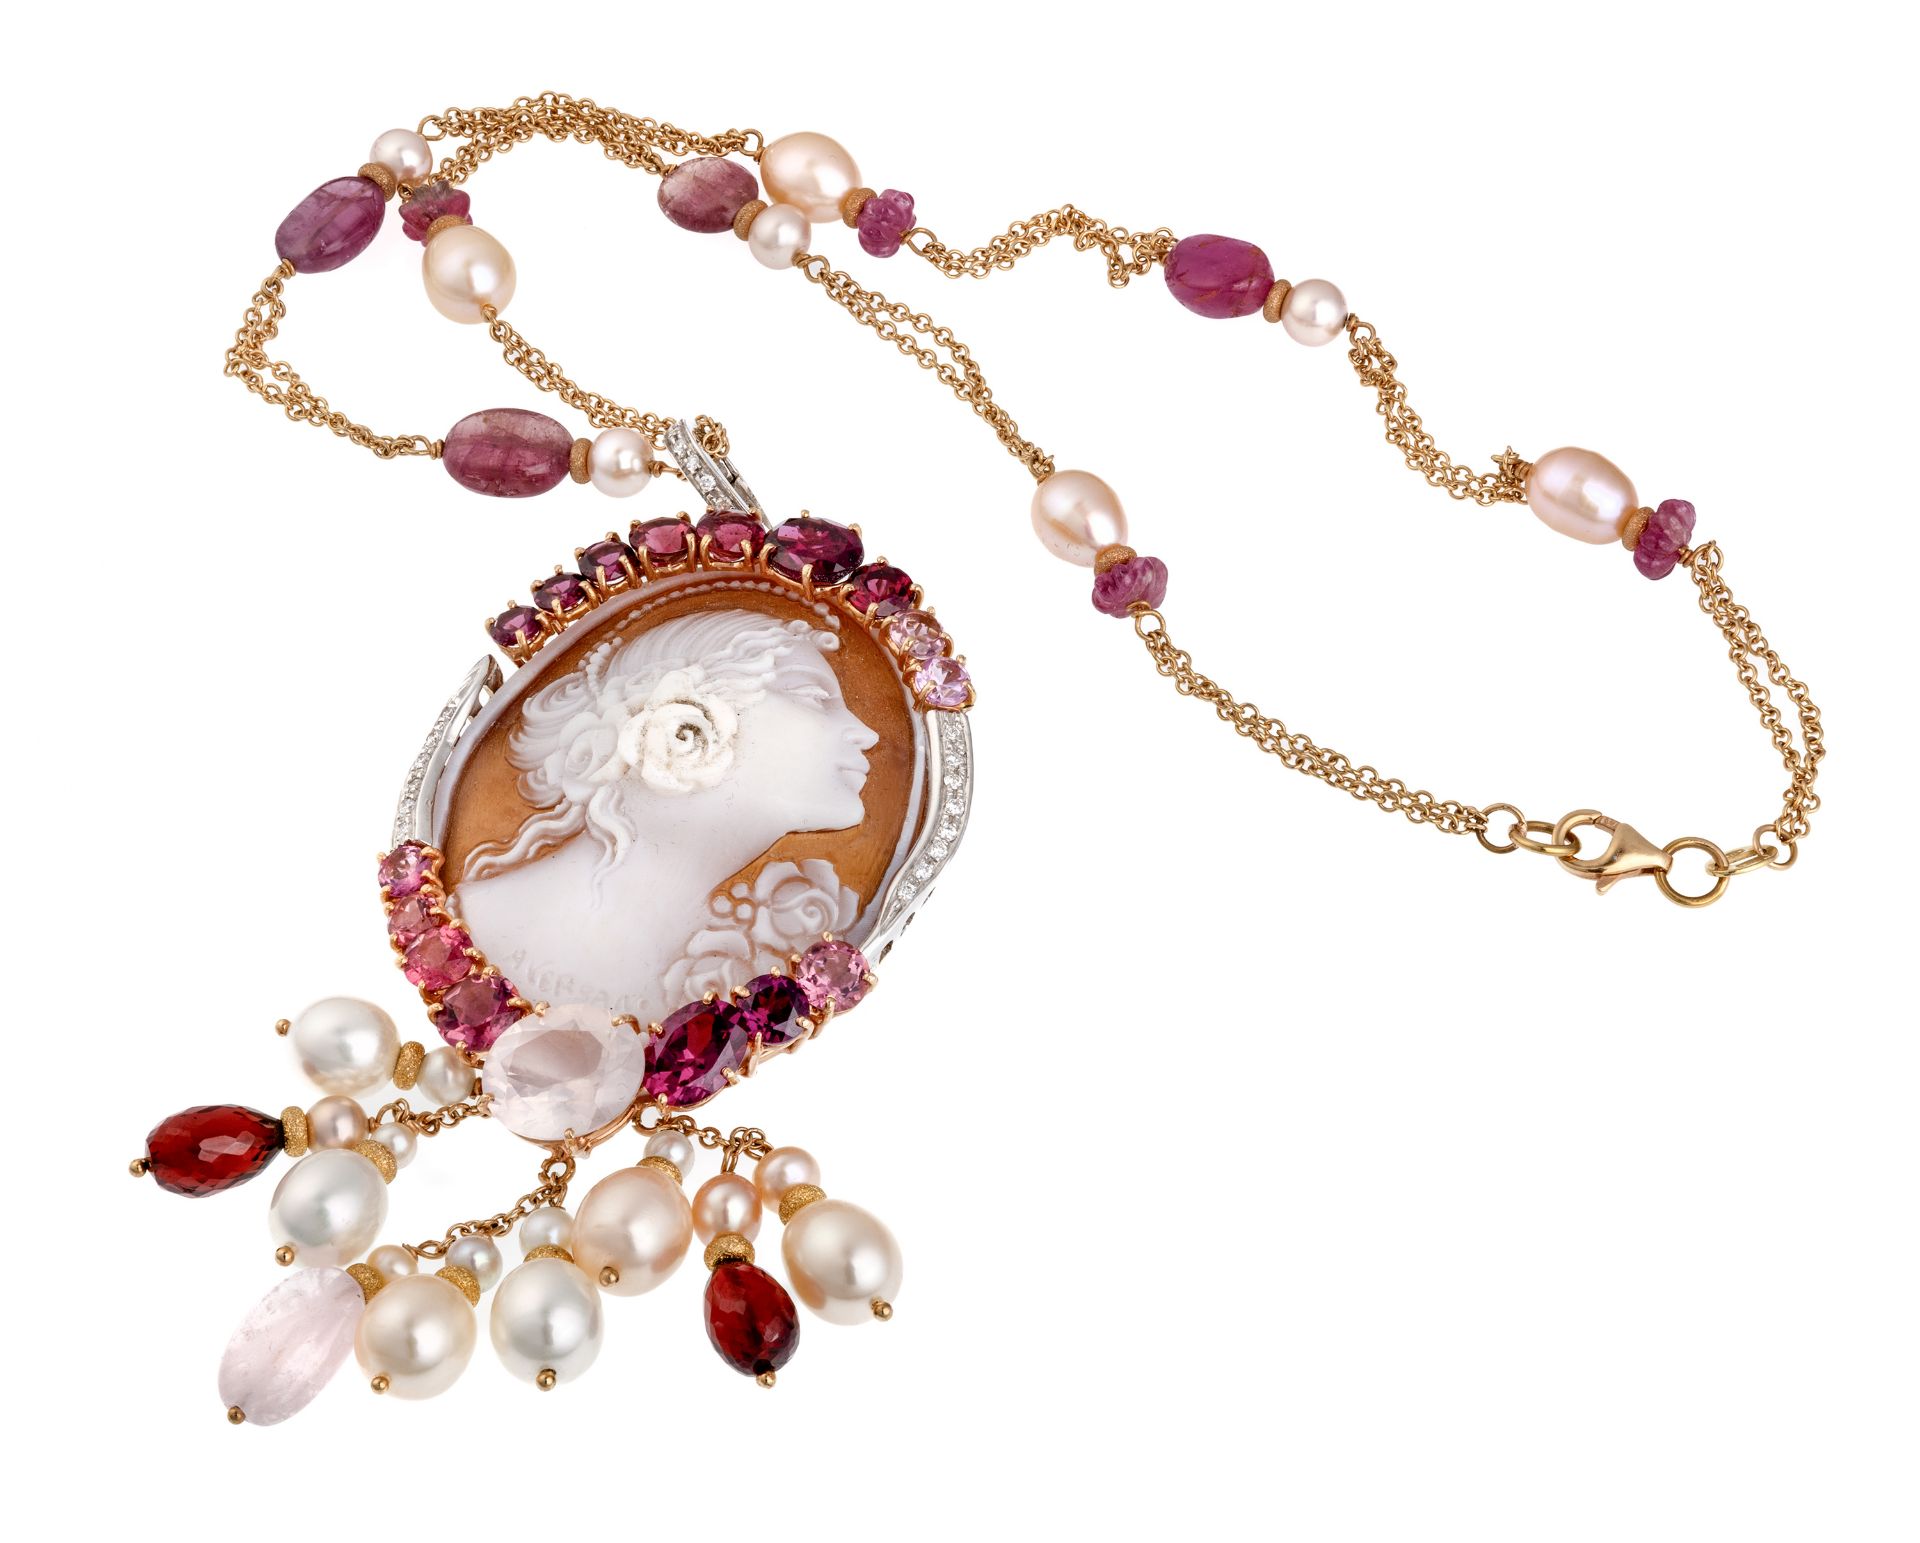 GOLD NECKLACE WITH CAMEO